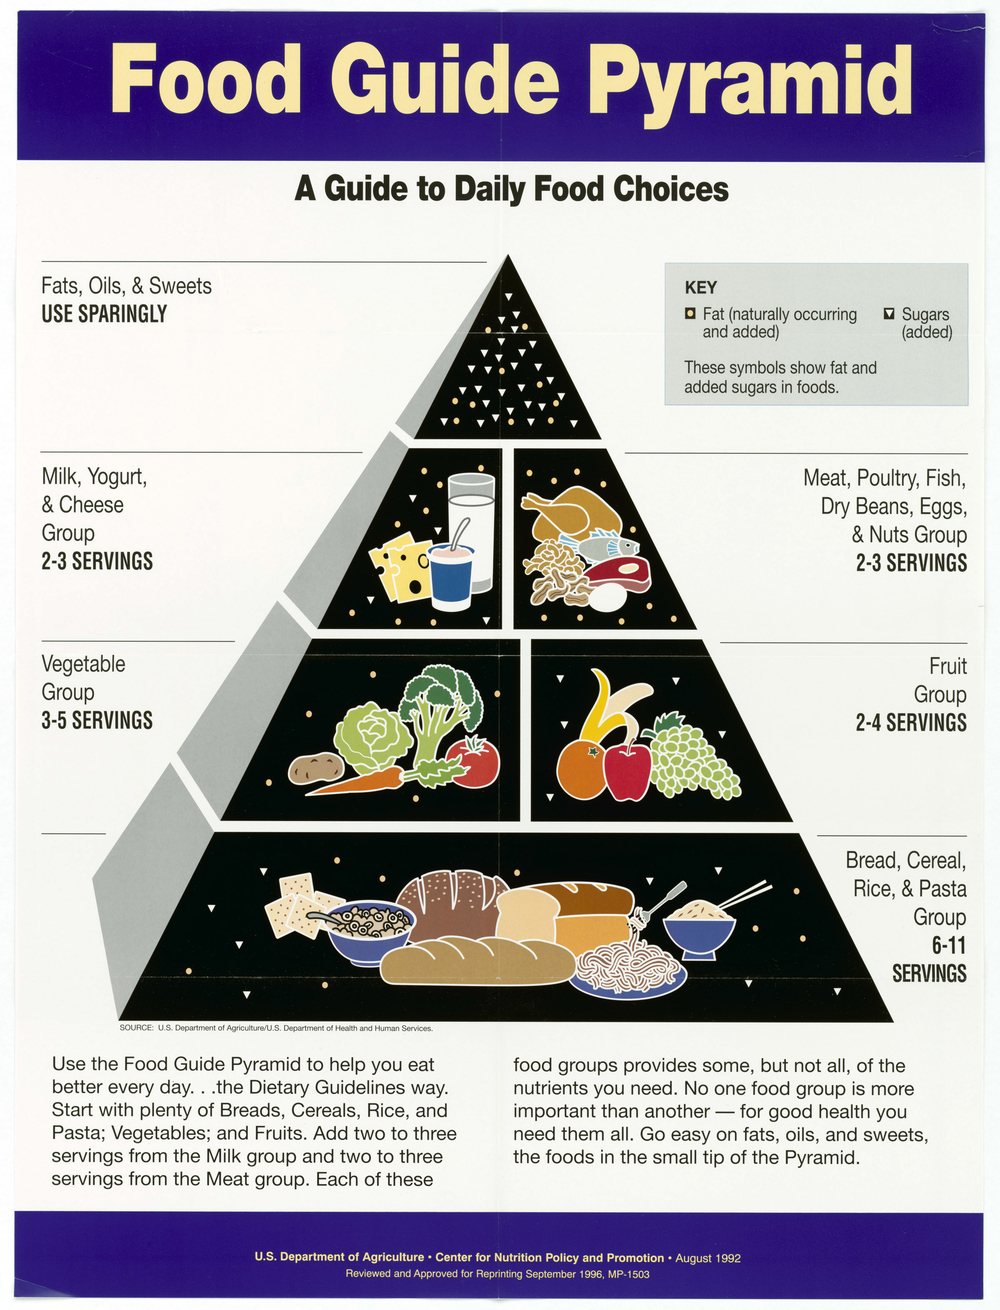 usda-2015-dietary-guidelines-are-they-right-for-you-ultimate-health